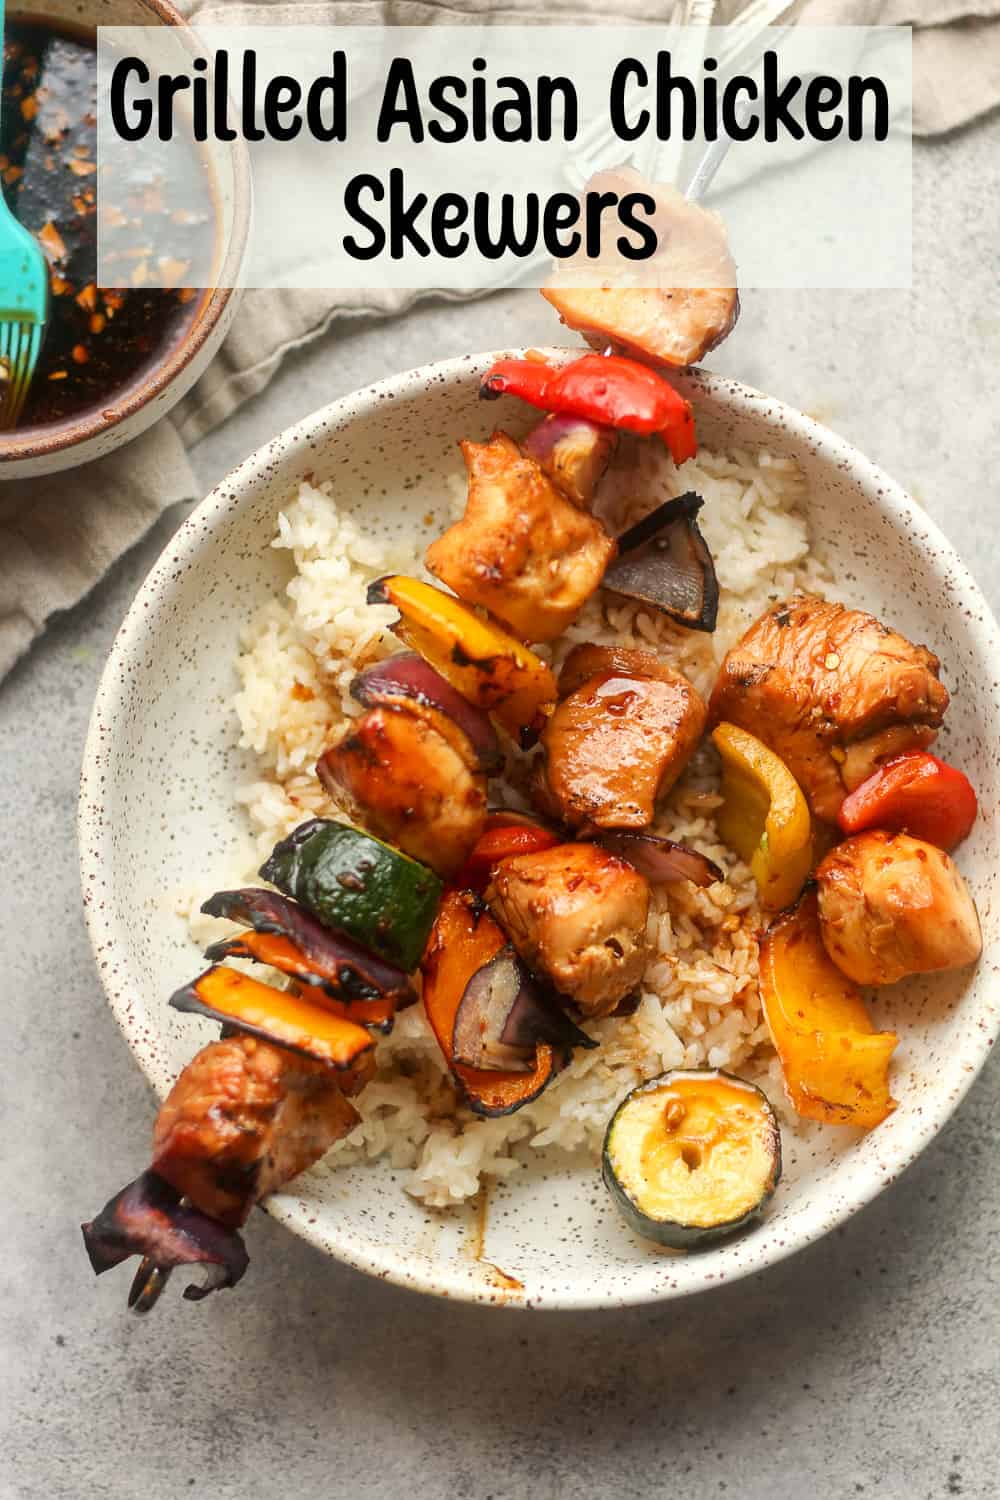 A bowl of grilled Asian chicken skewers over rice with a gray napkin.